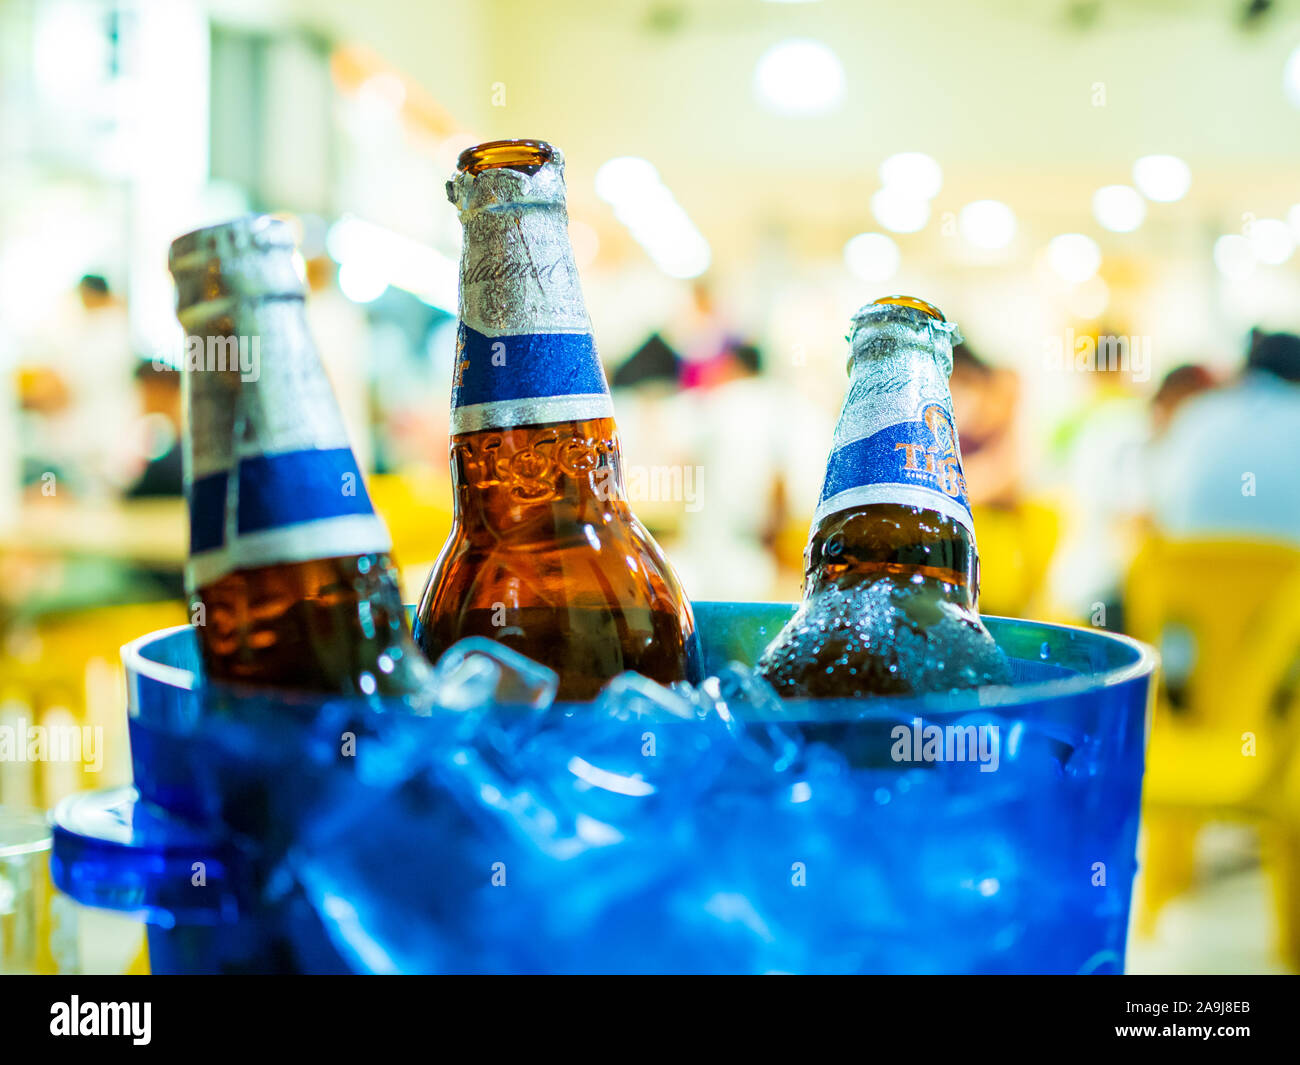 SINGAPORE - 17 MAR 2019 - close up of Tiger beer bottles in a bucket of ice at a coffeeshop in Singapore Stock Photo